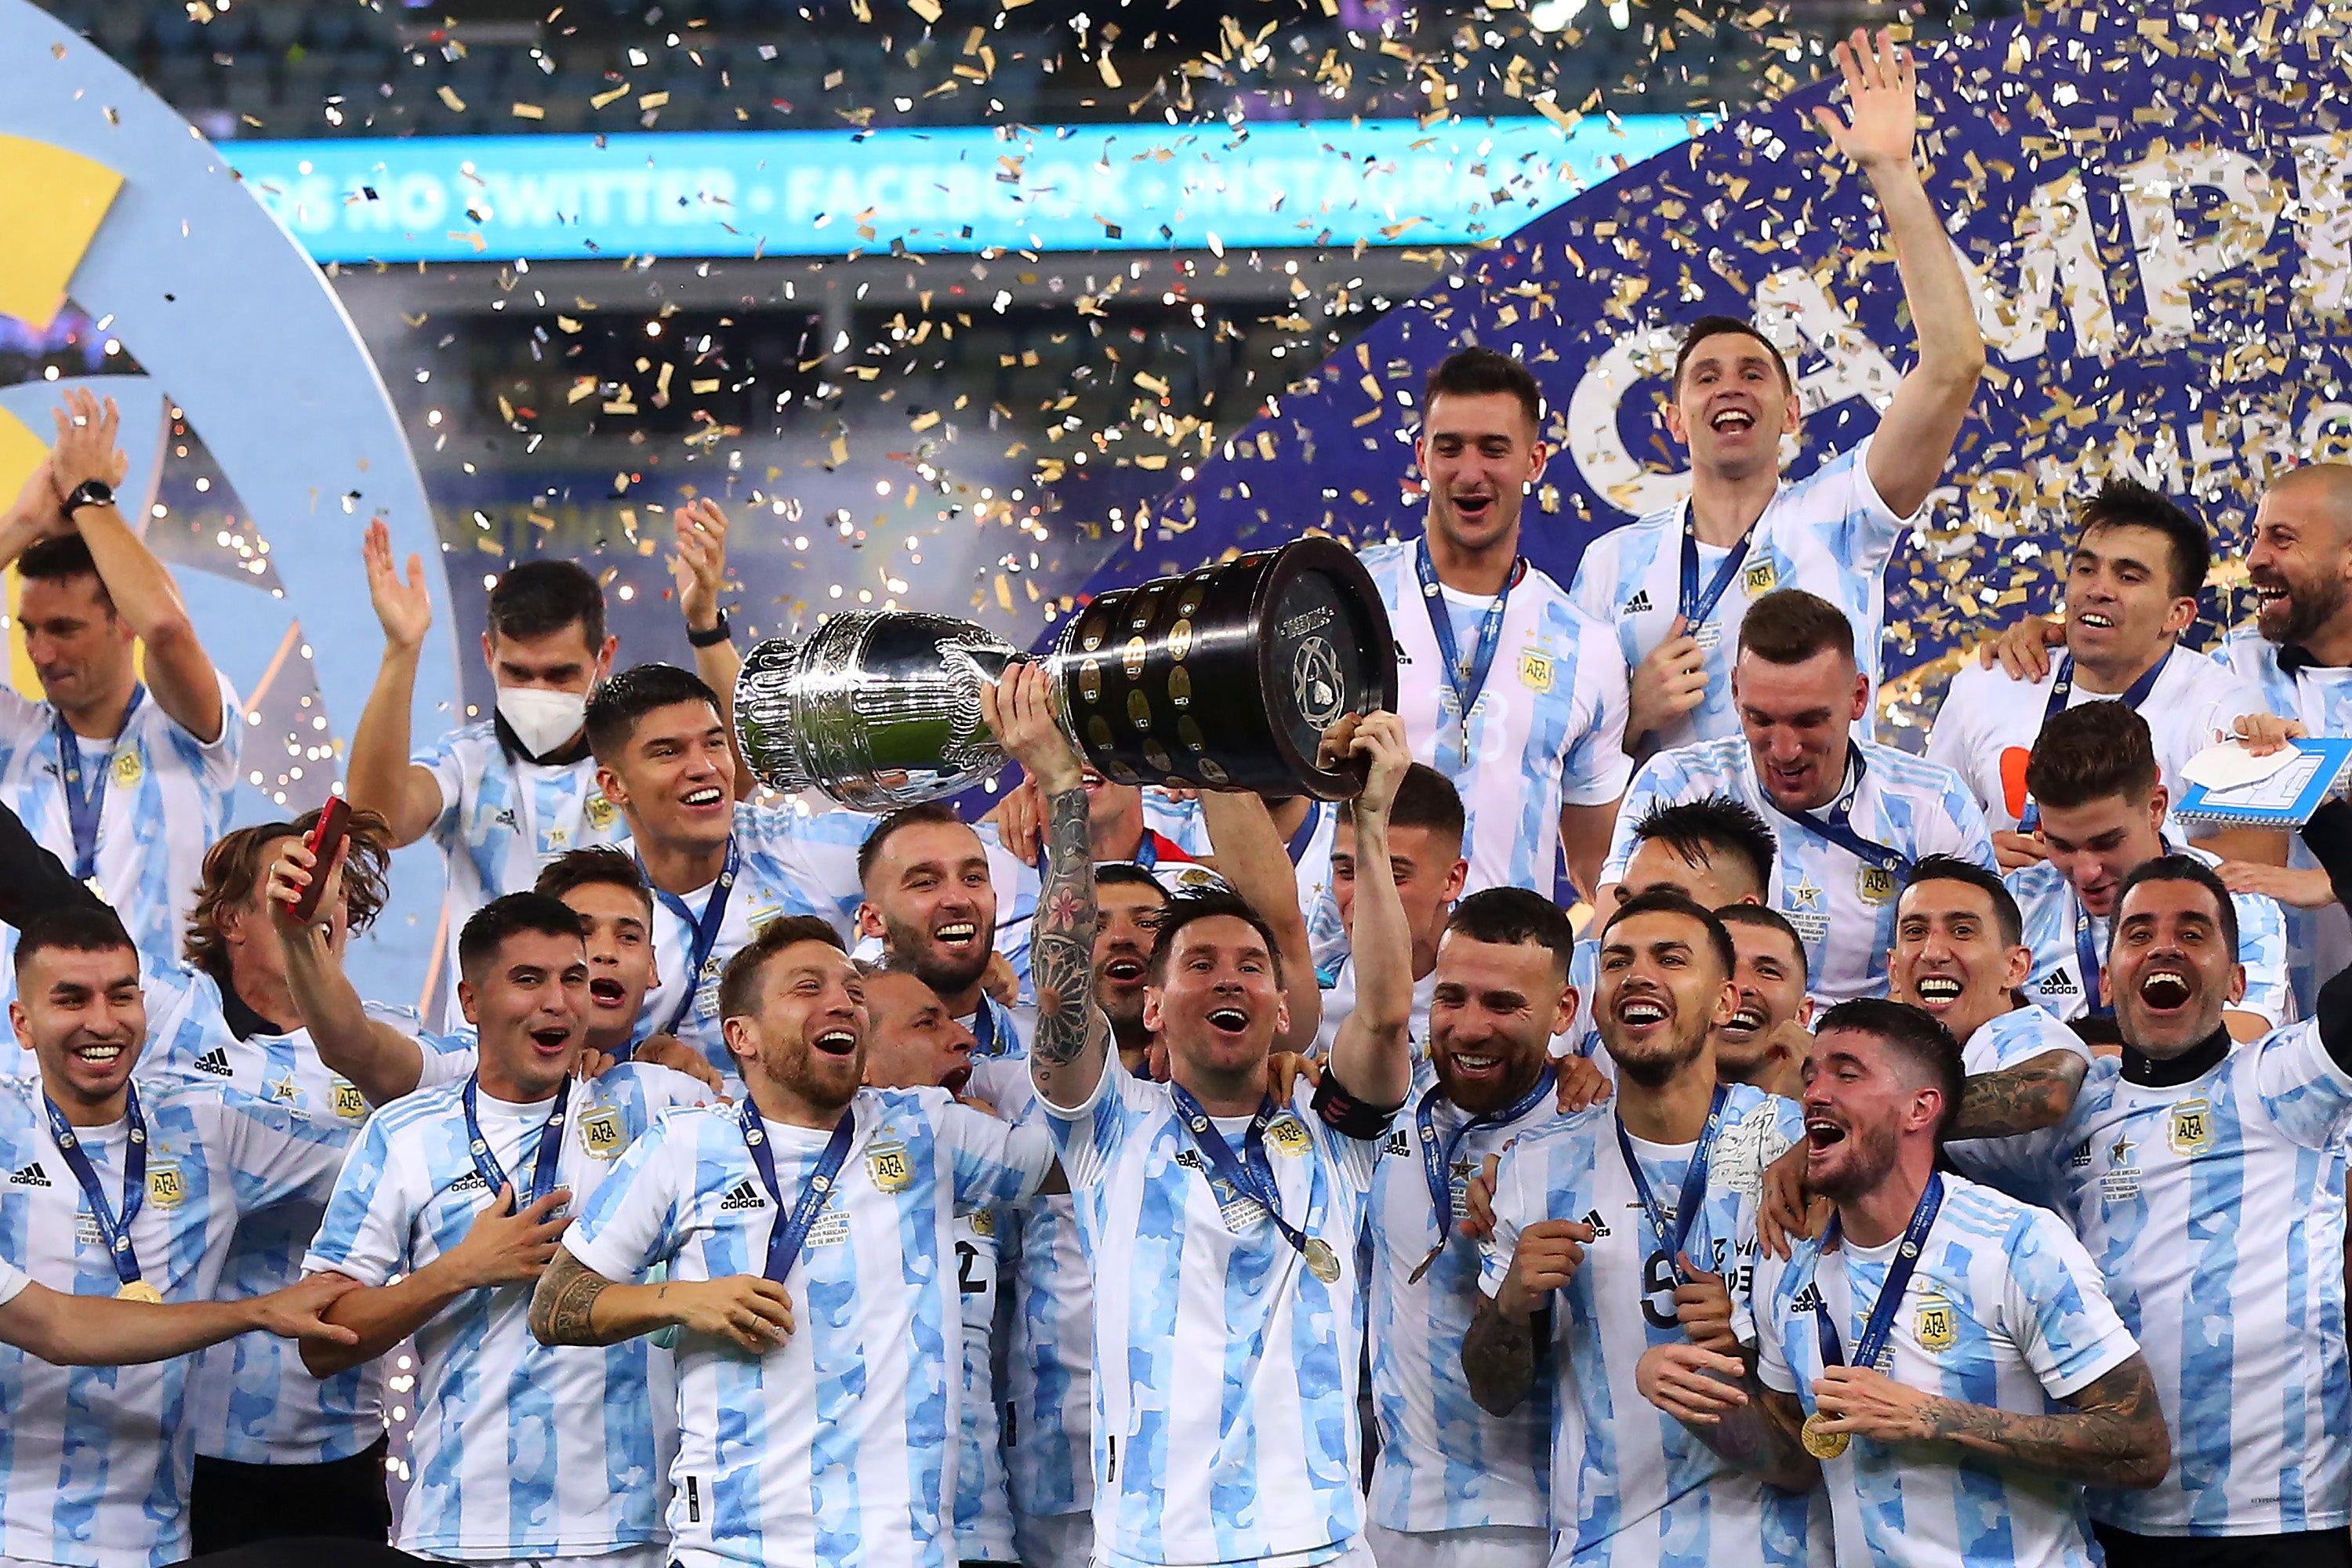 Argentina ended their 28-year trophy drought at last year’s Copa America